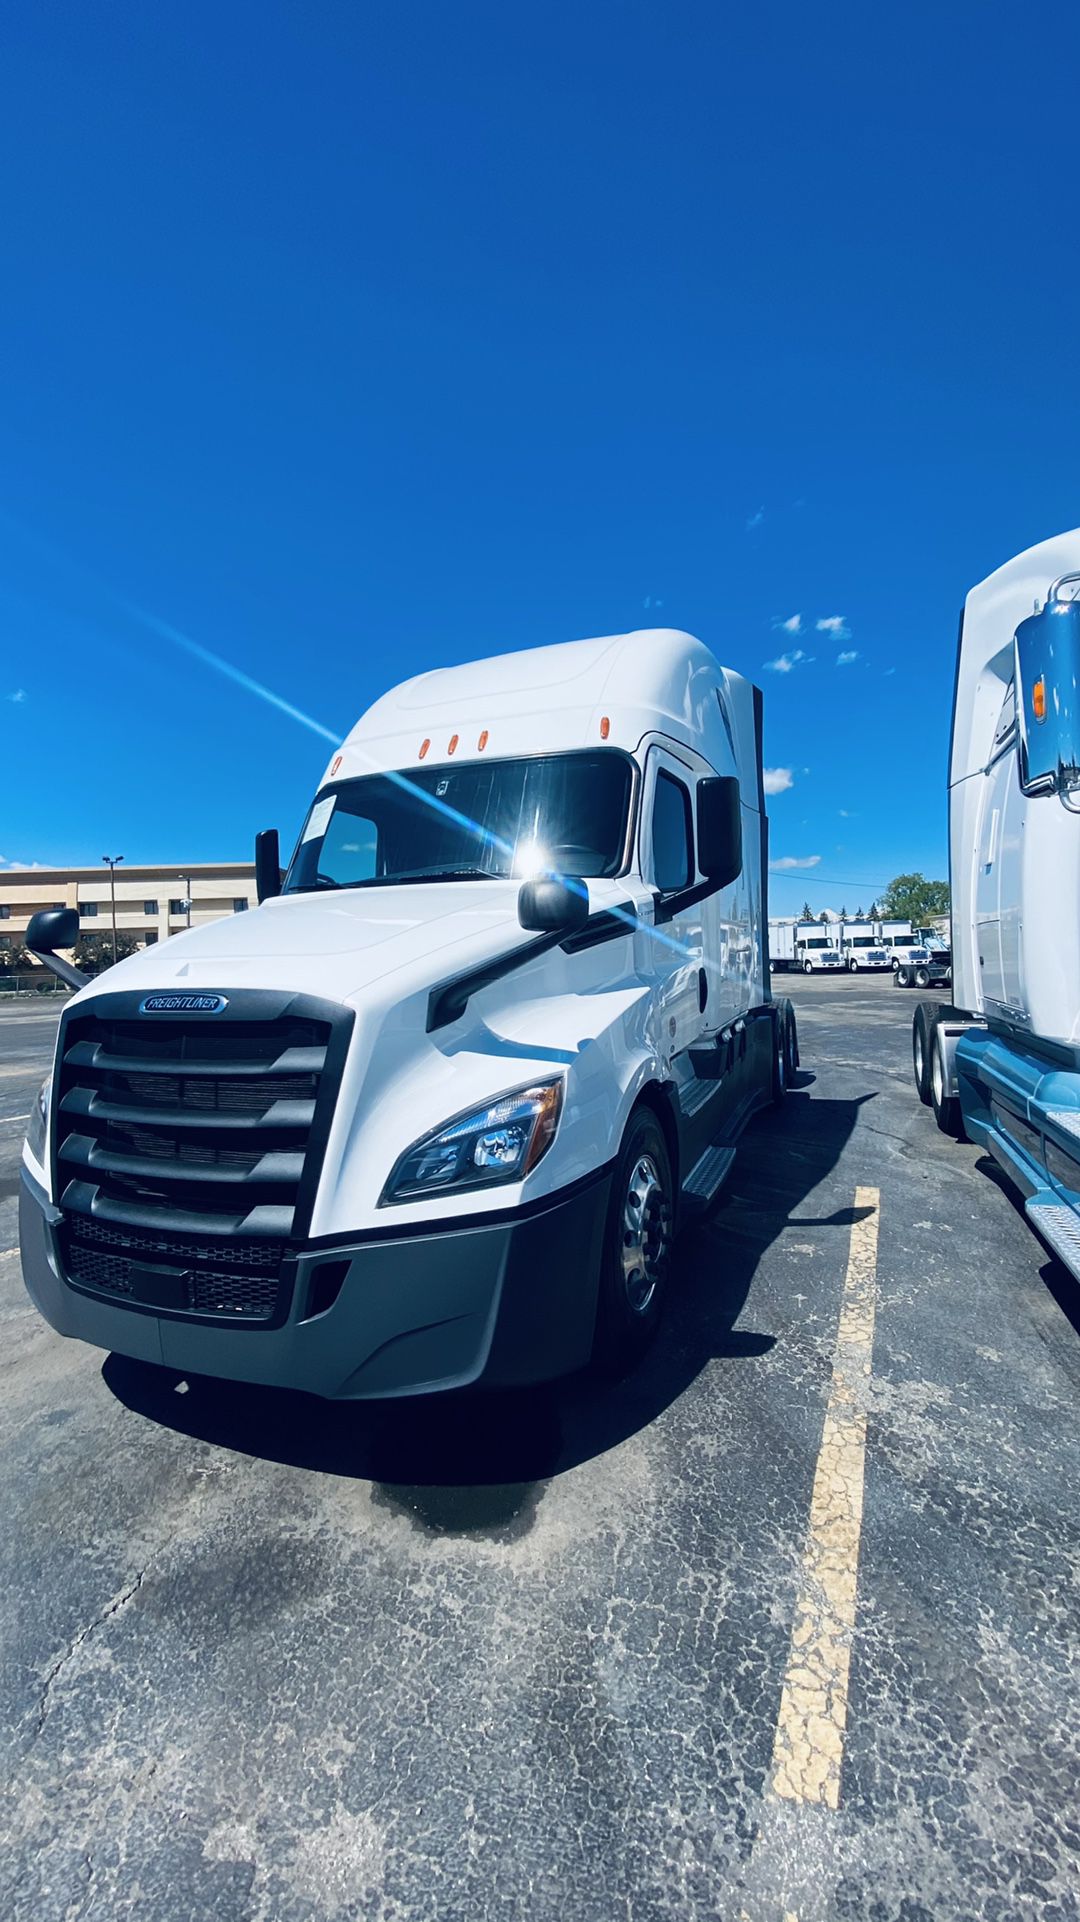 Freightliner Cascadia 2018 .  Best Pay !!